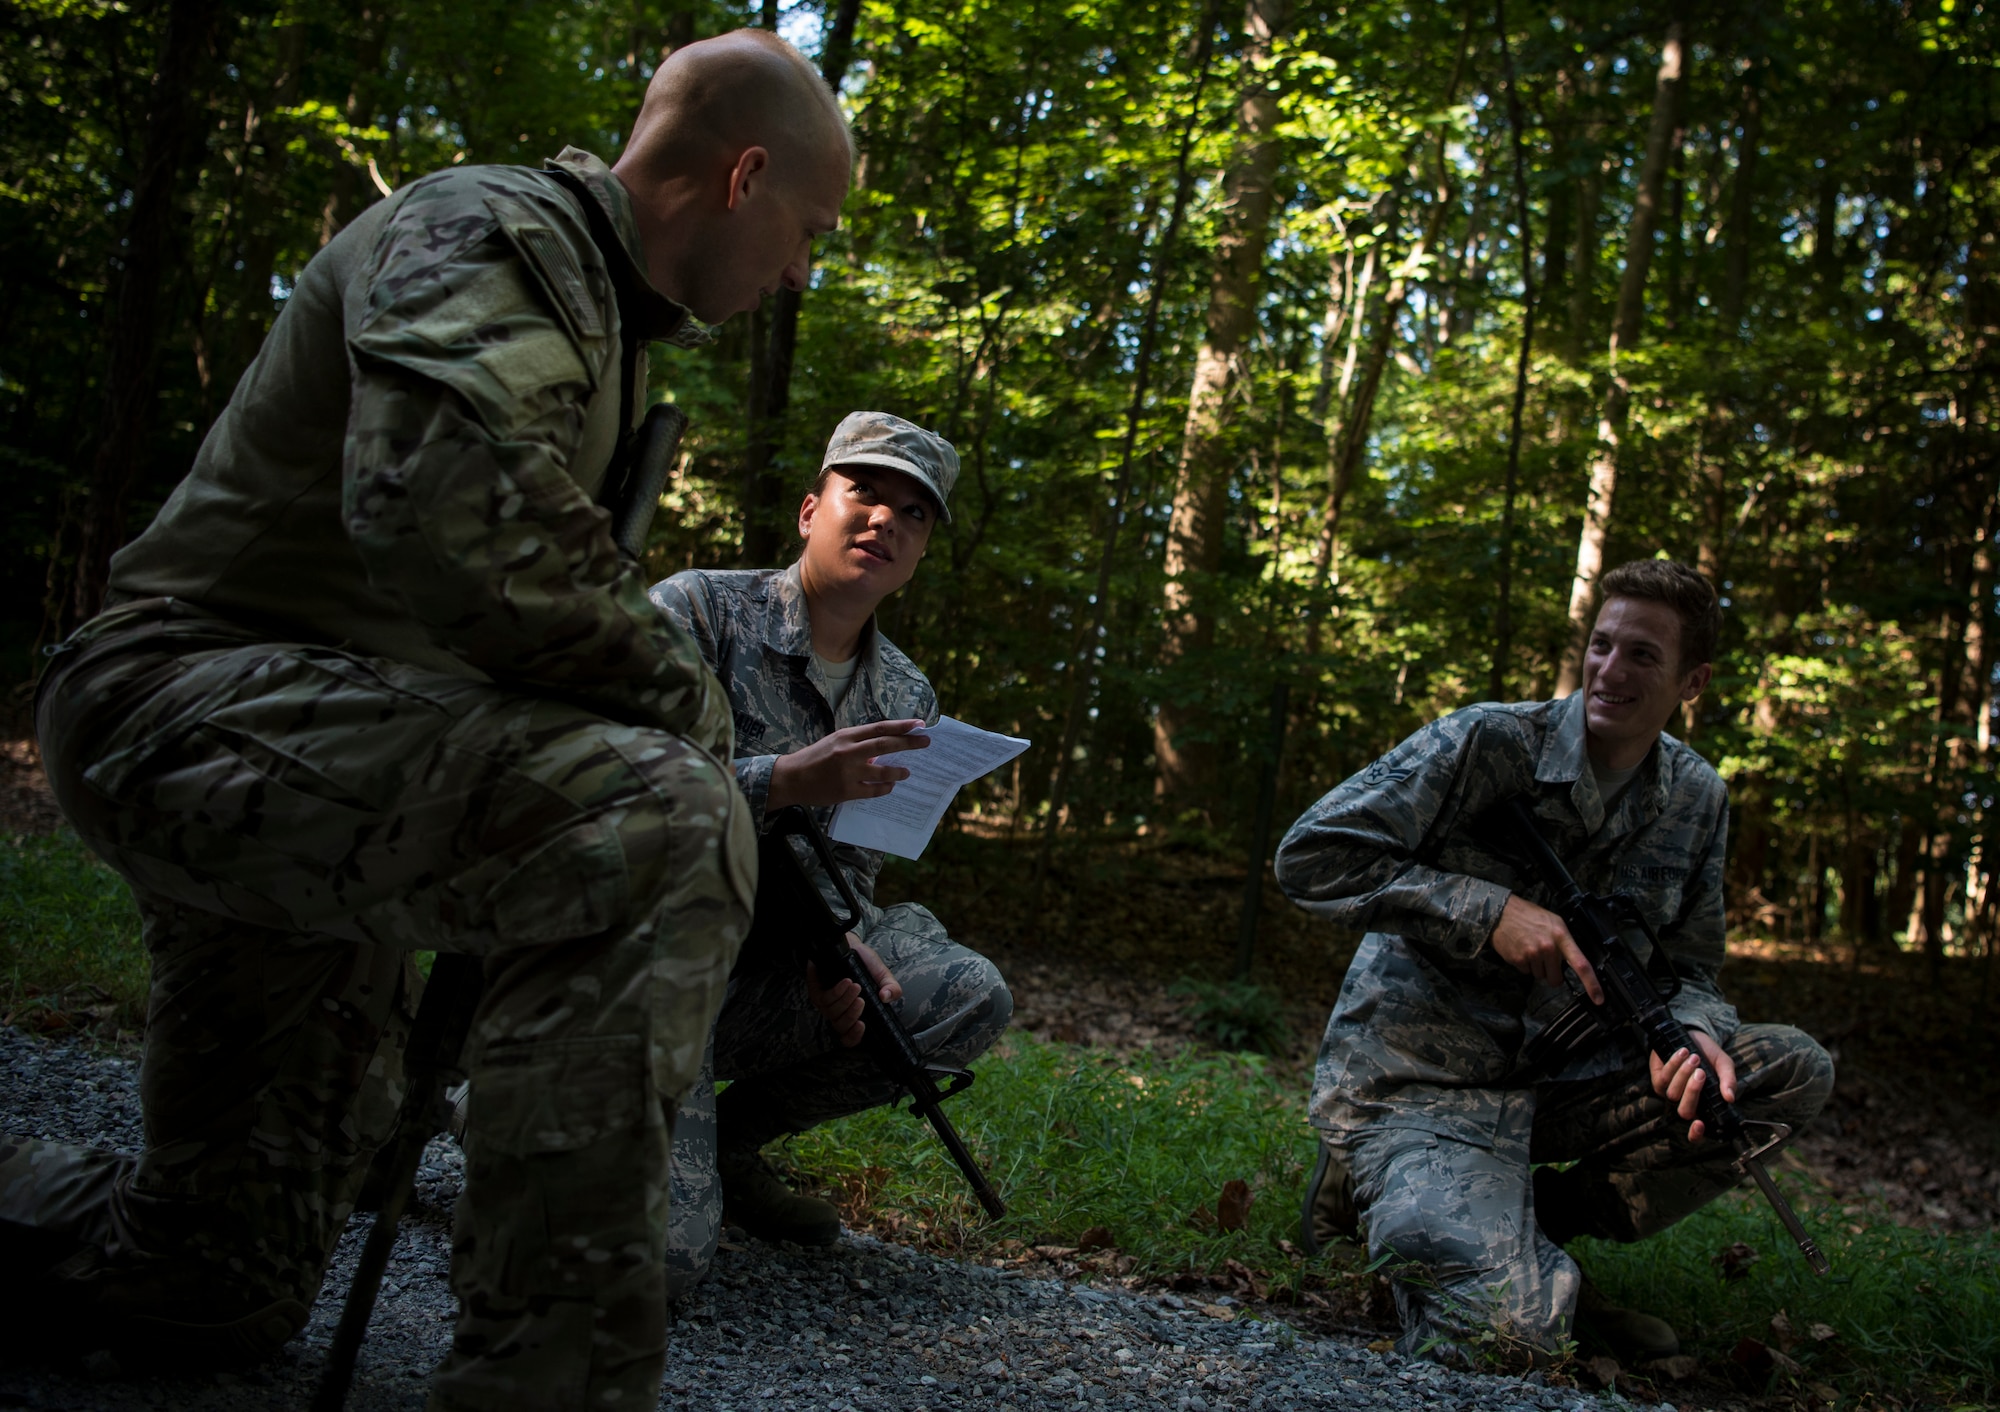 U.S. Air Force Airmen assigned to the 633rd Civil Engineer Squadron practice individual movement techniques during Prime Base Engineer Emergency Force training at Joint Base Langley-Eustis, Virginia, July 19, 2018.